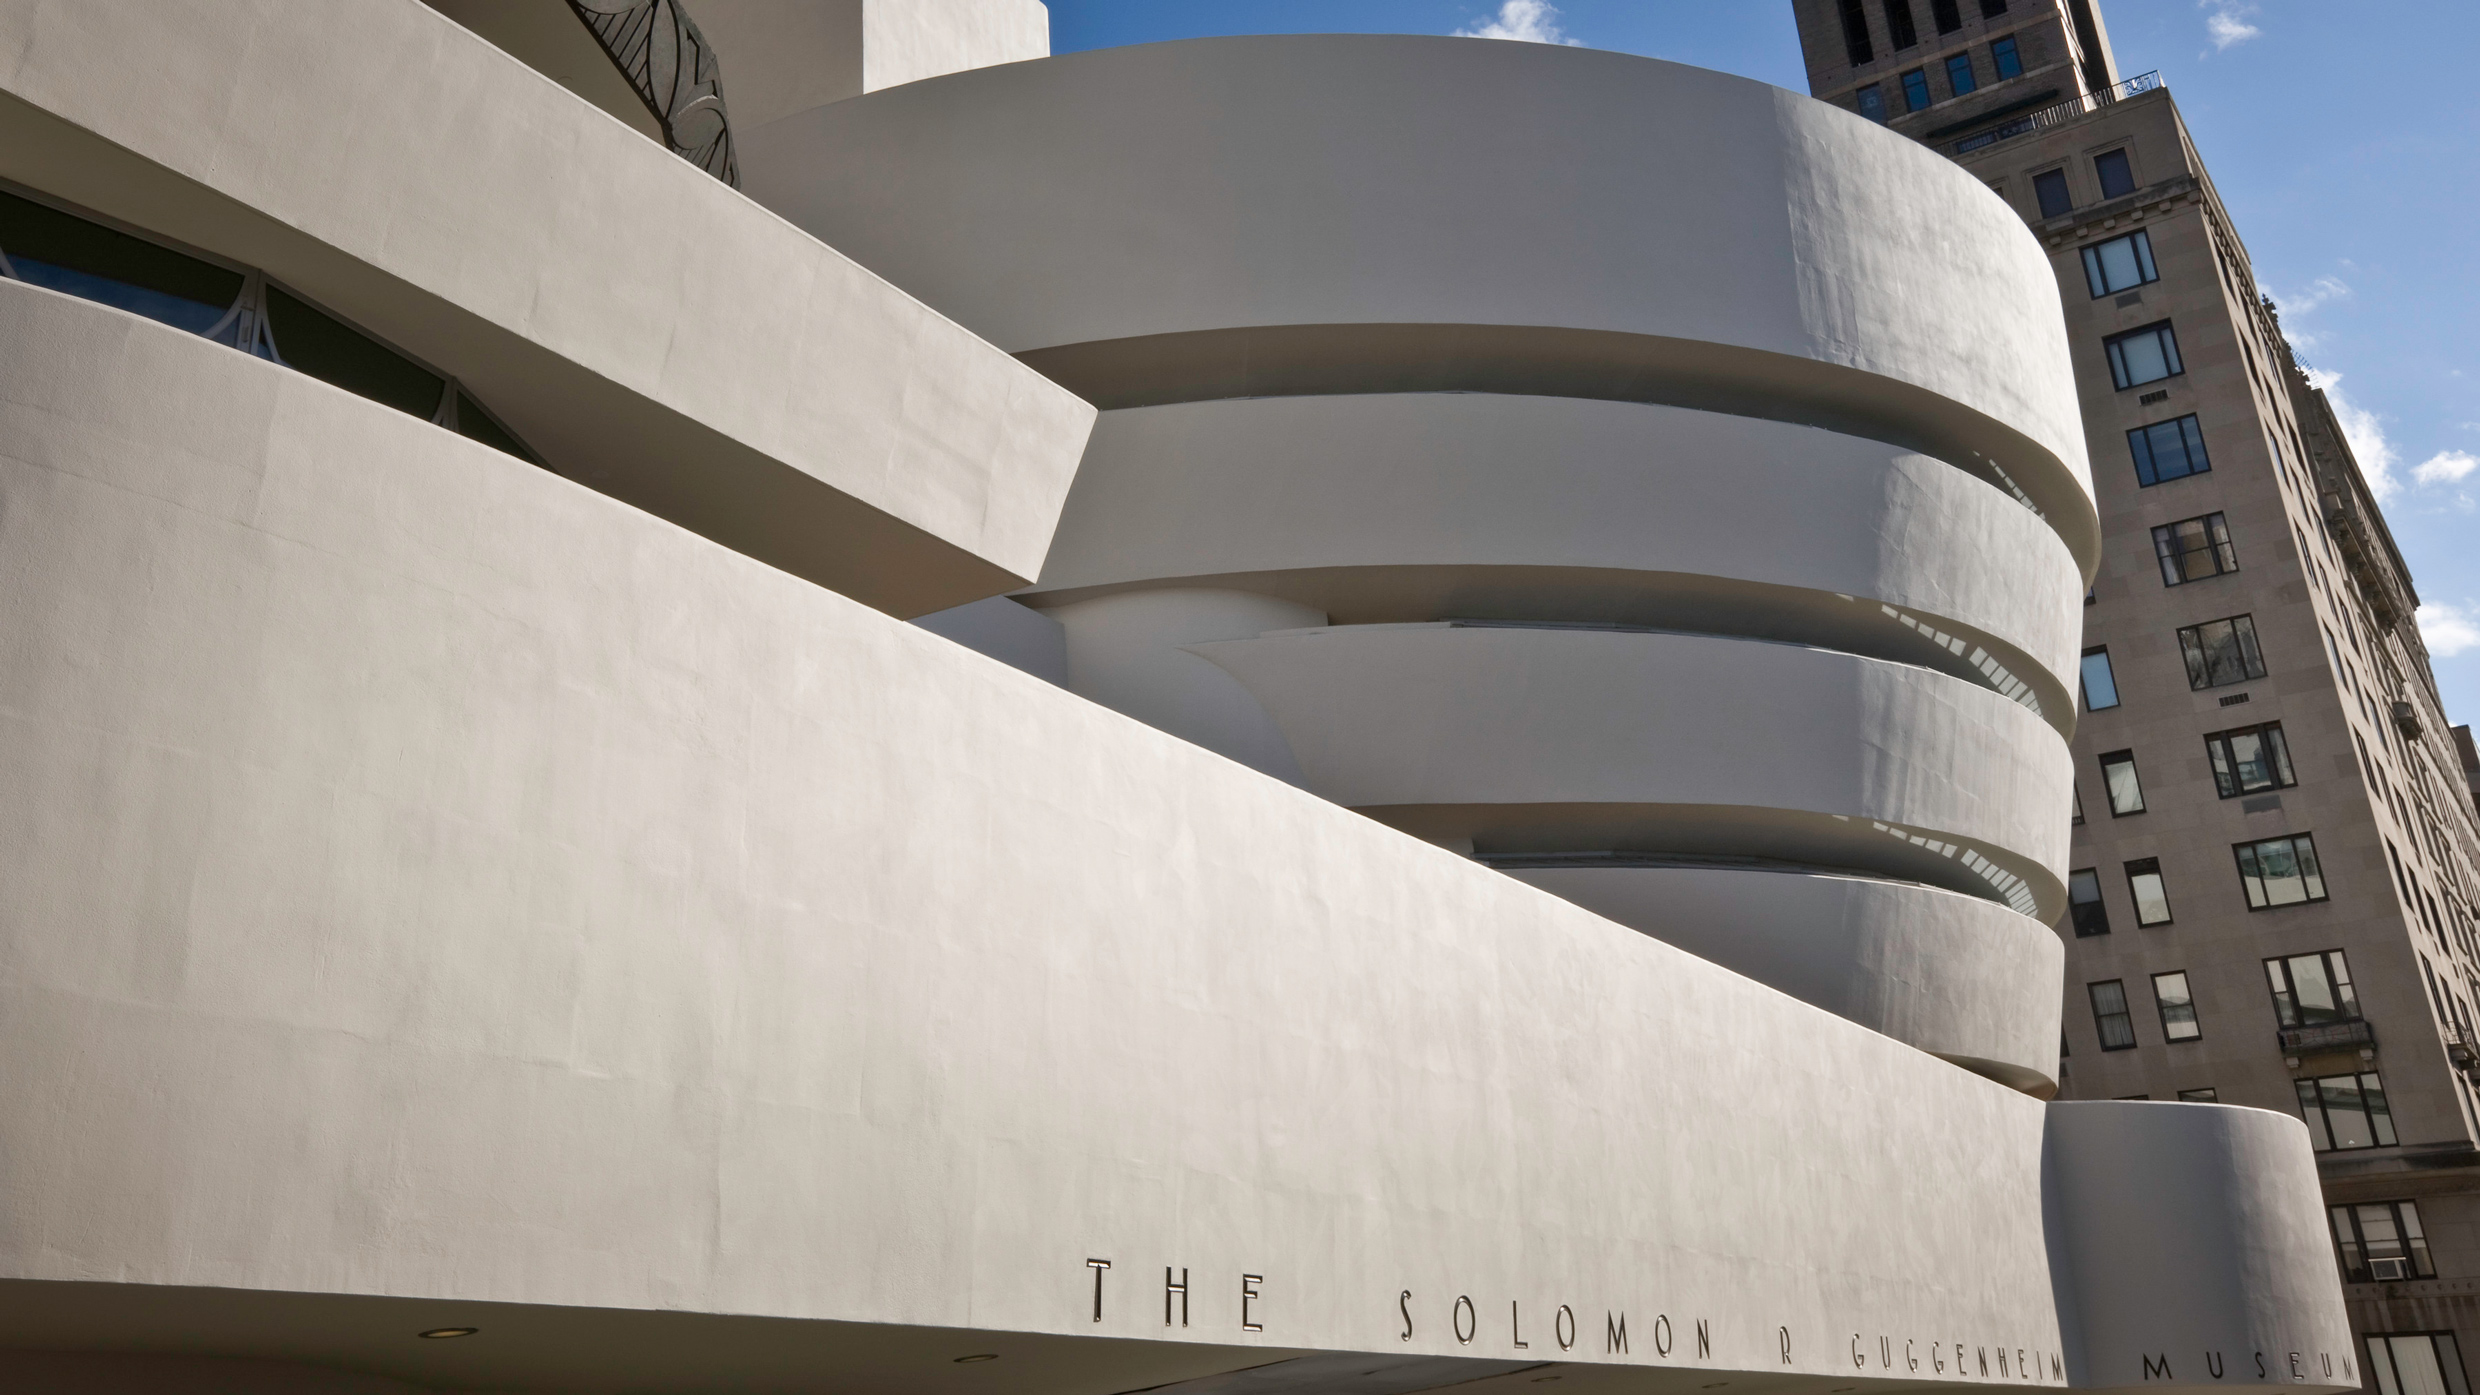 What We Can Learn From The Guggenheims Facade The Guggenheim Museums